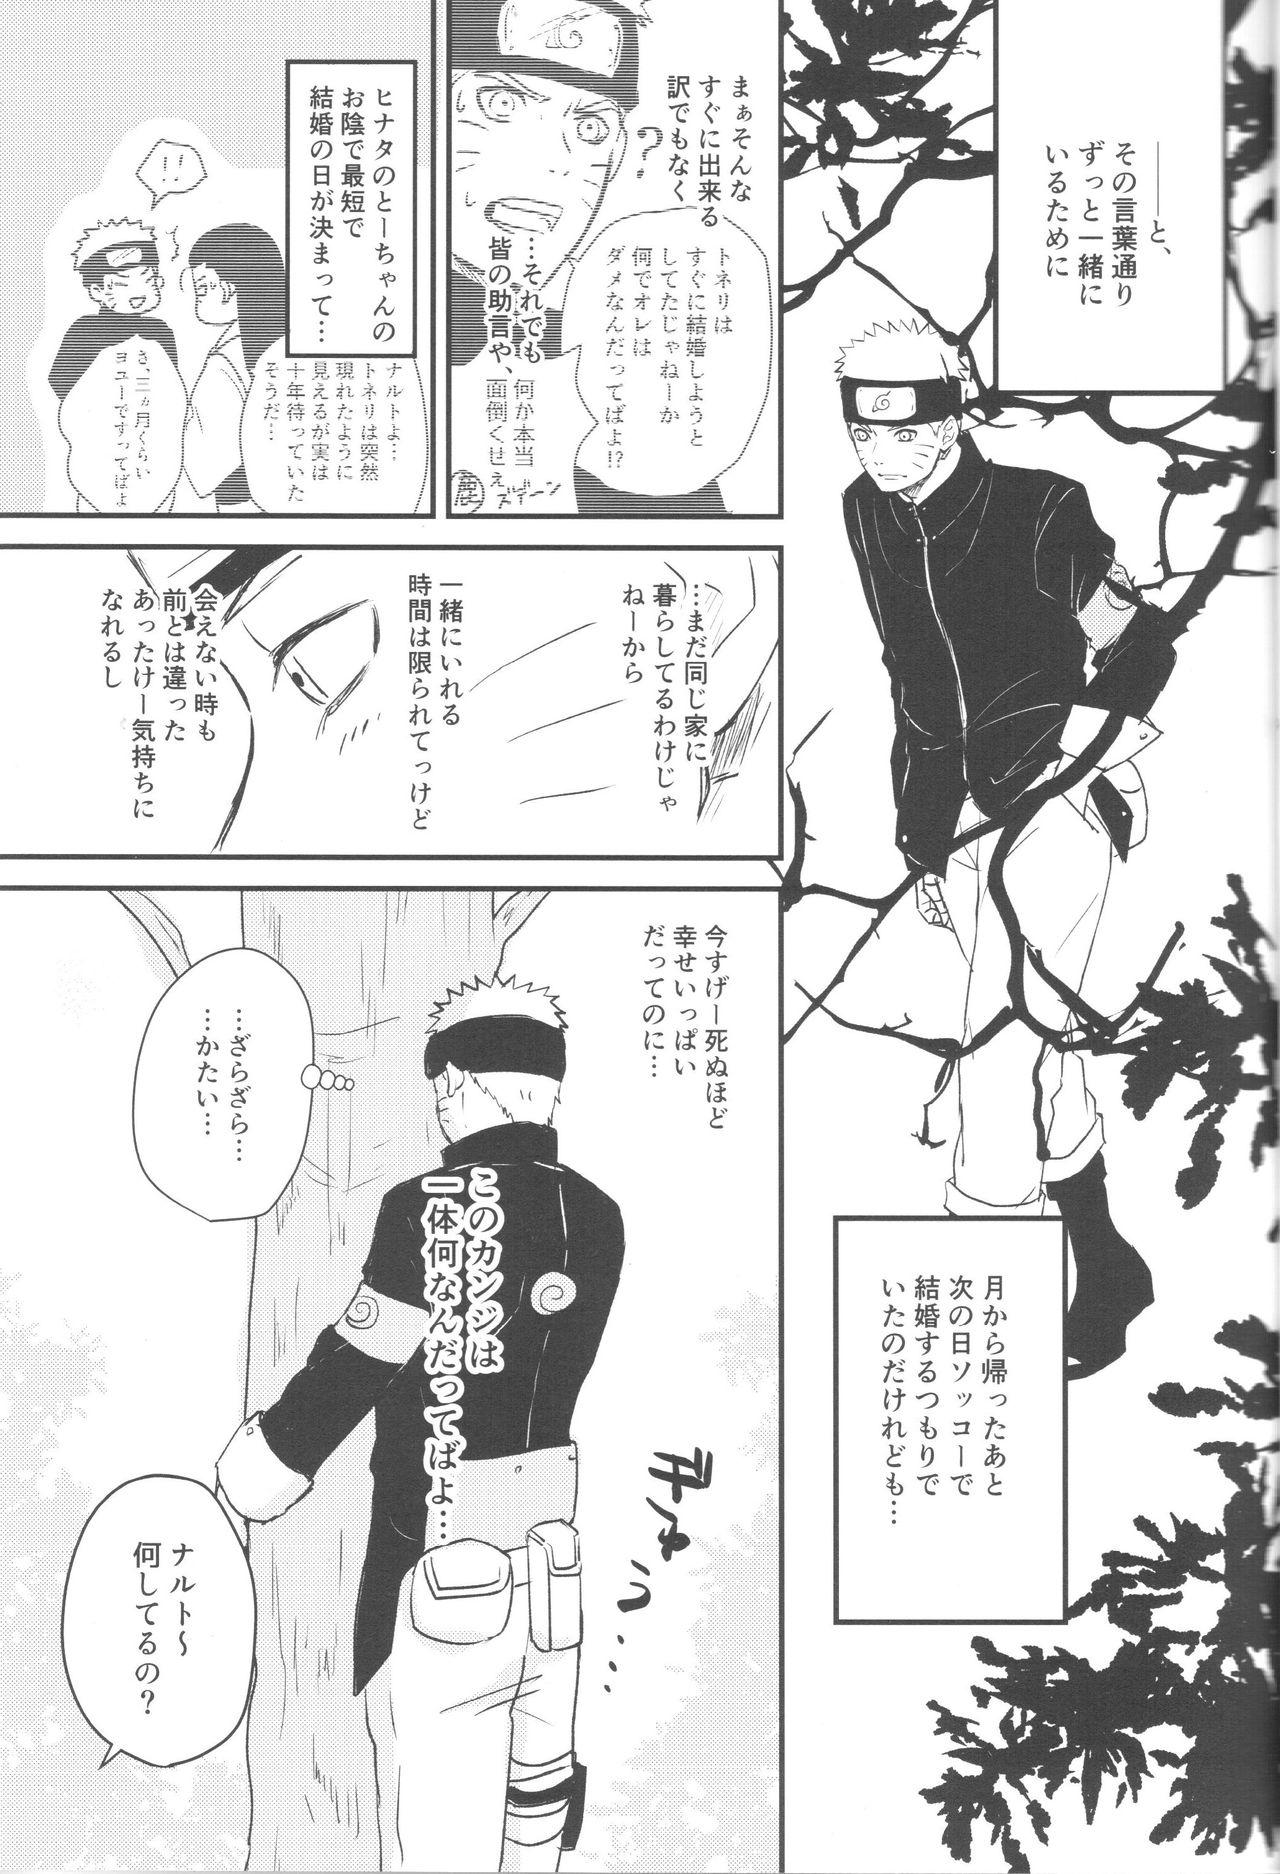 Finger X times - Naruto Two - Page 6